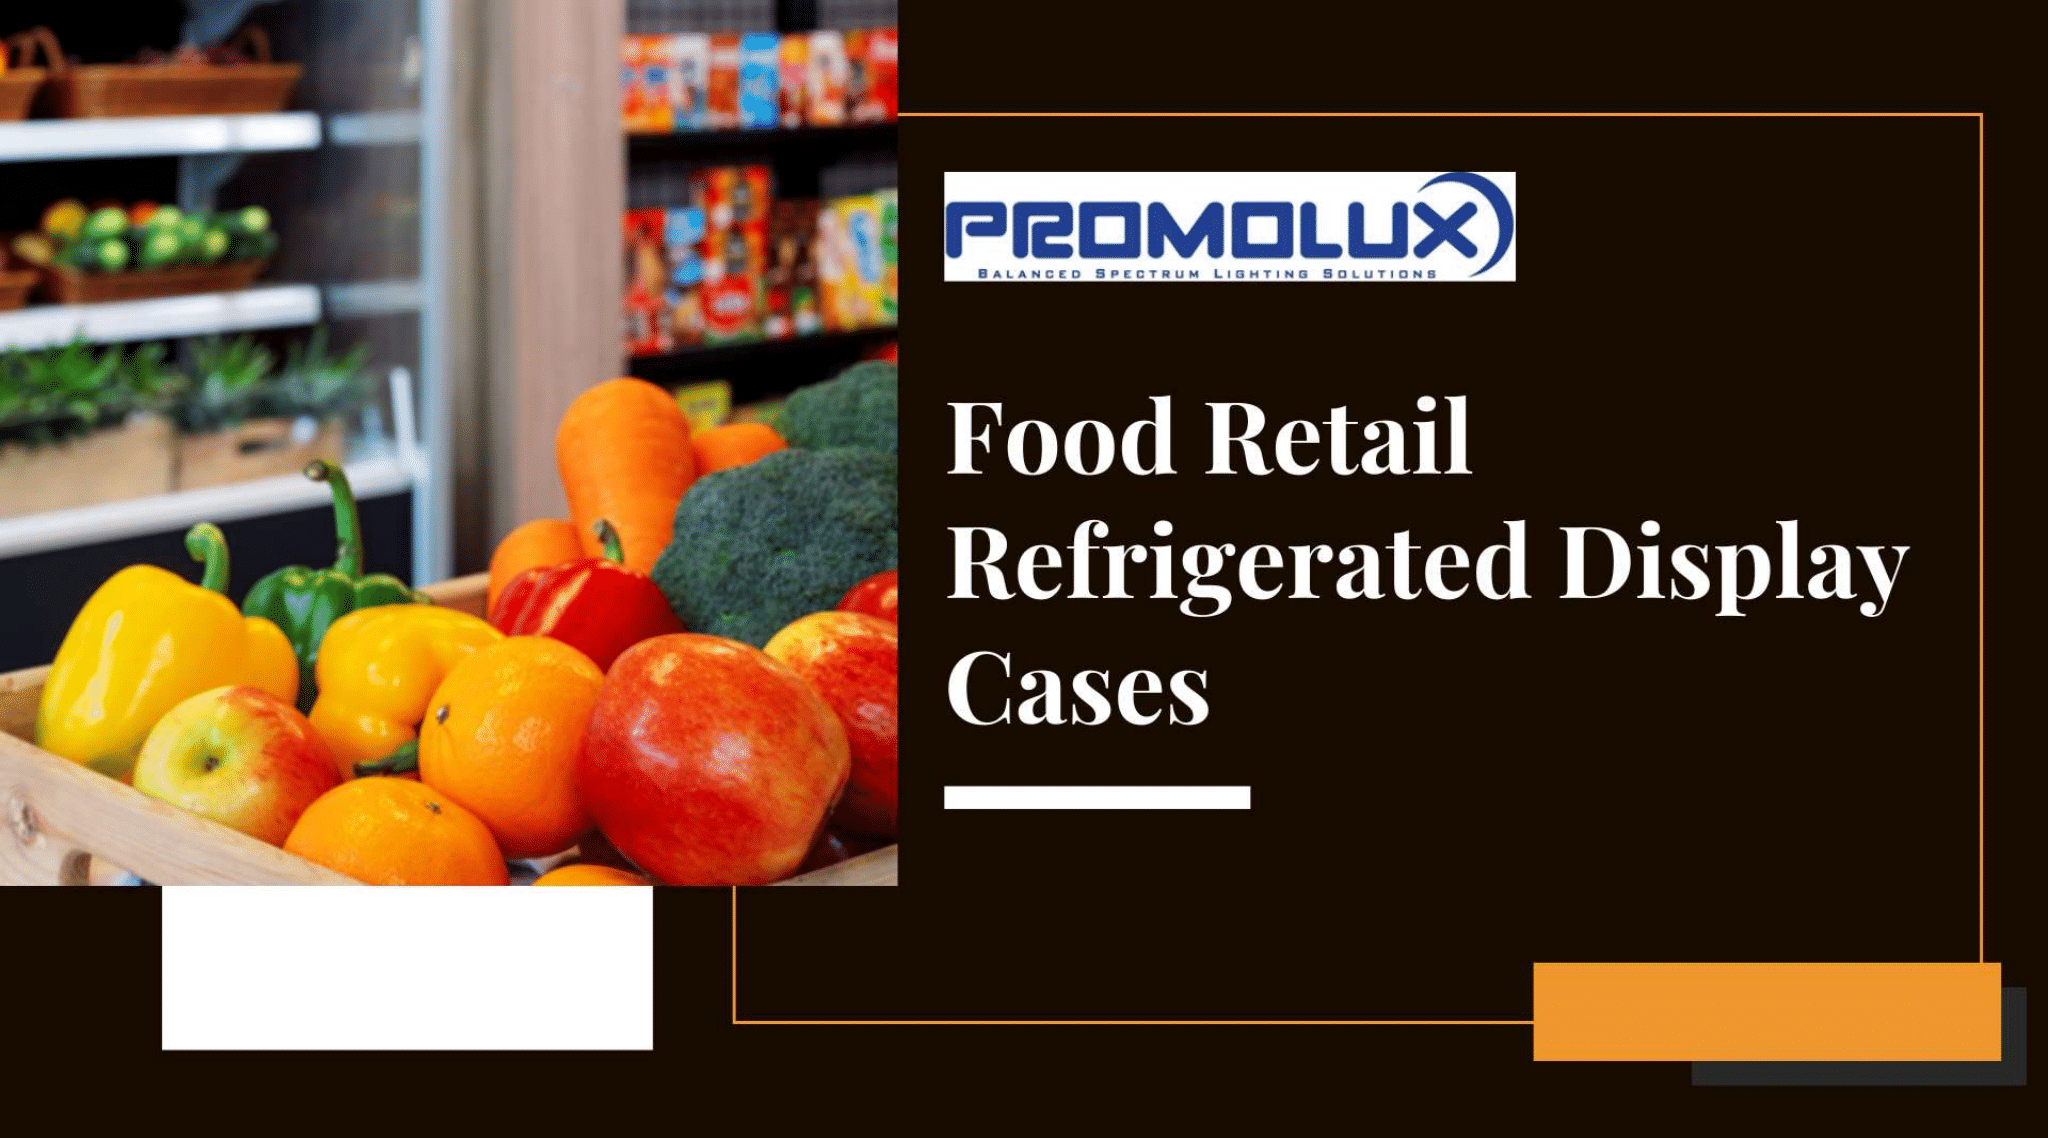 Dropbox - Food Retail Refrigerated Display Cases.pdf - Simplify your life